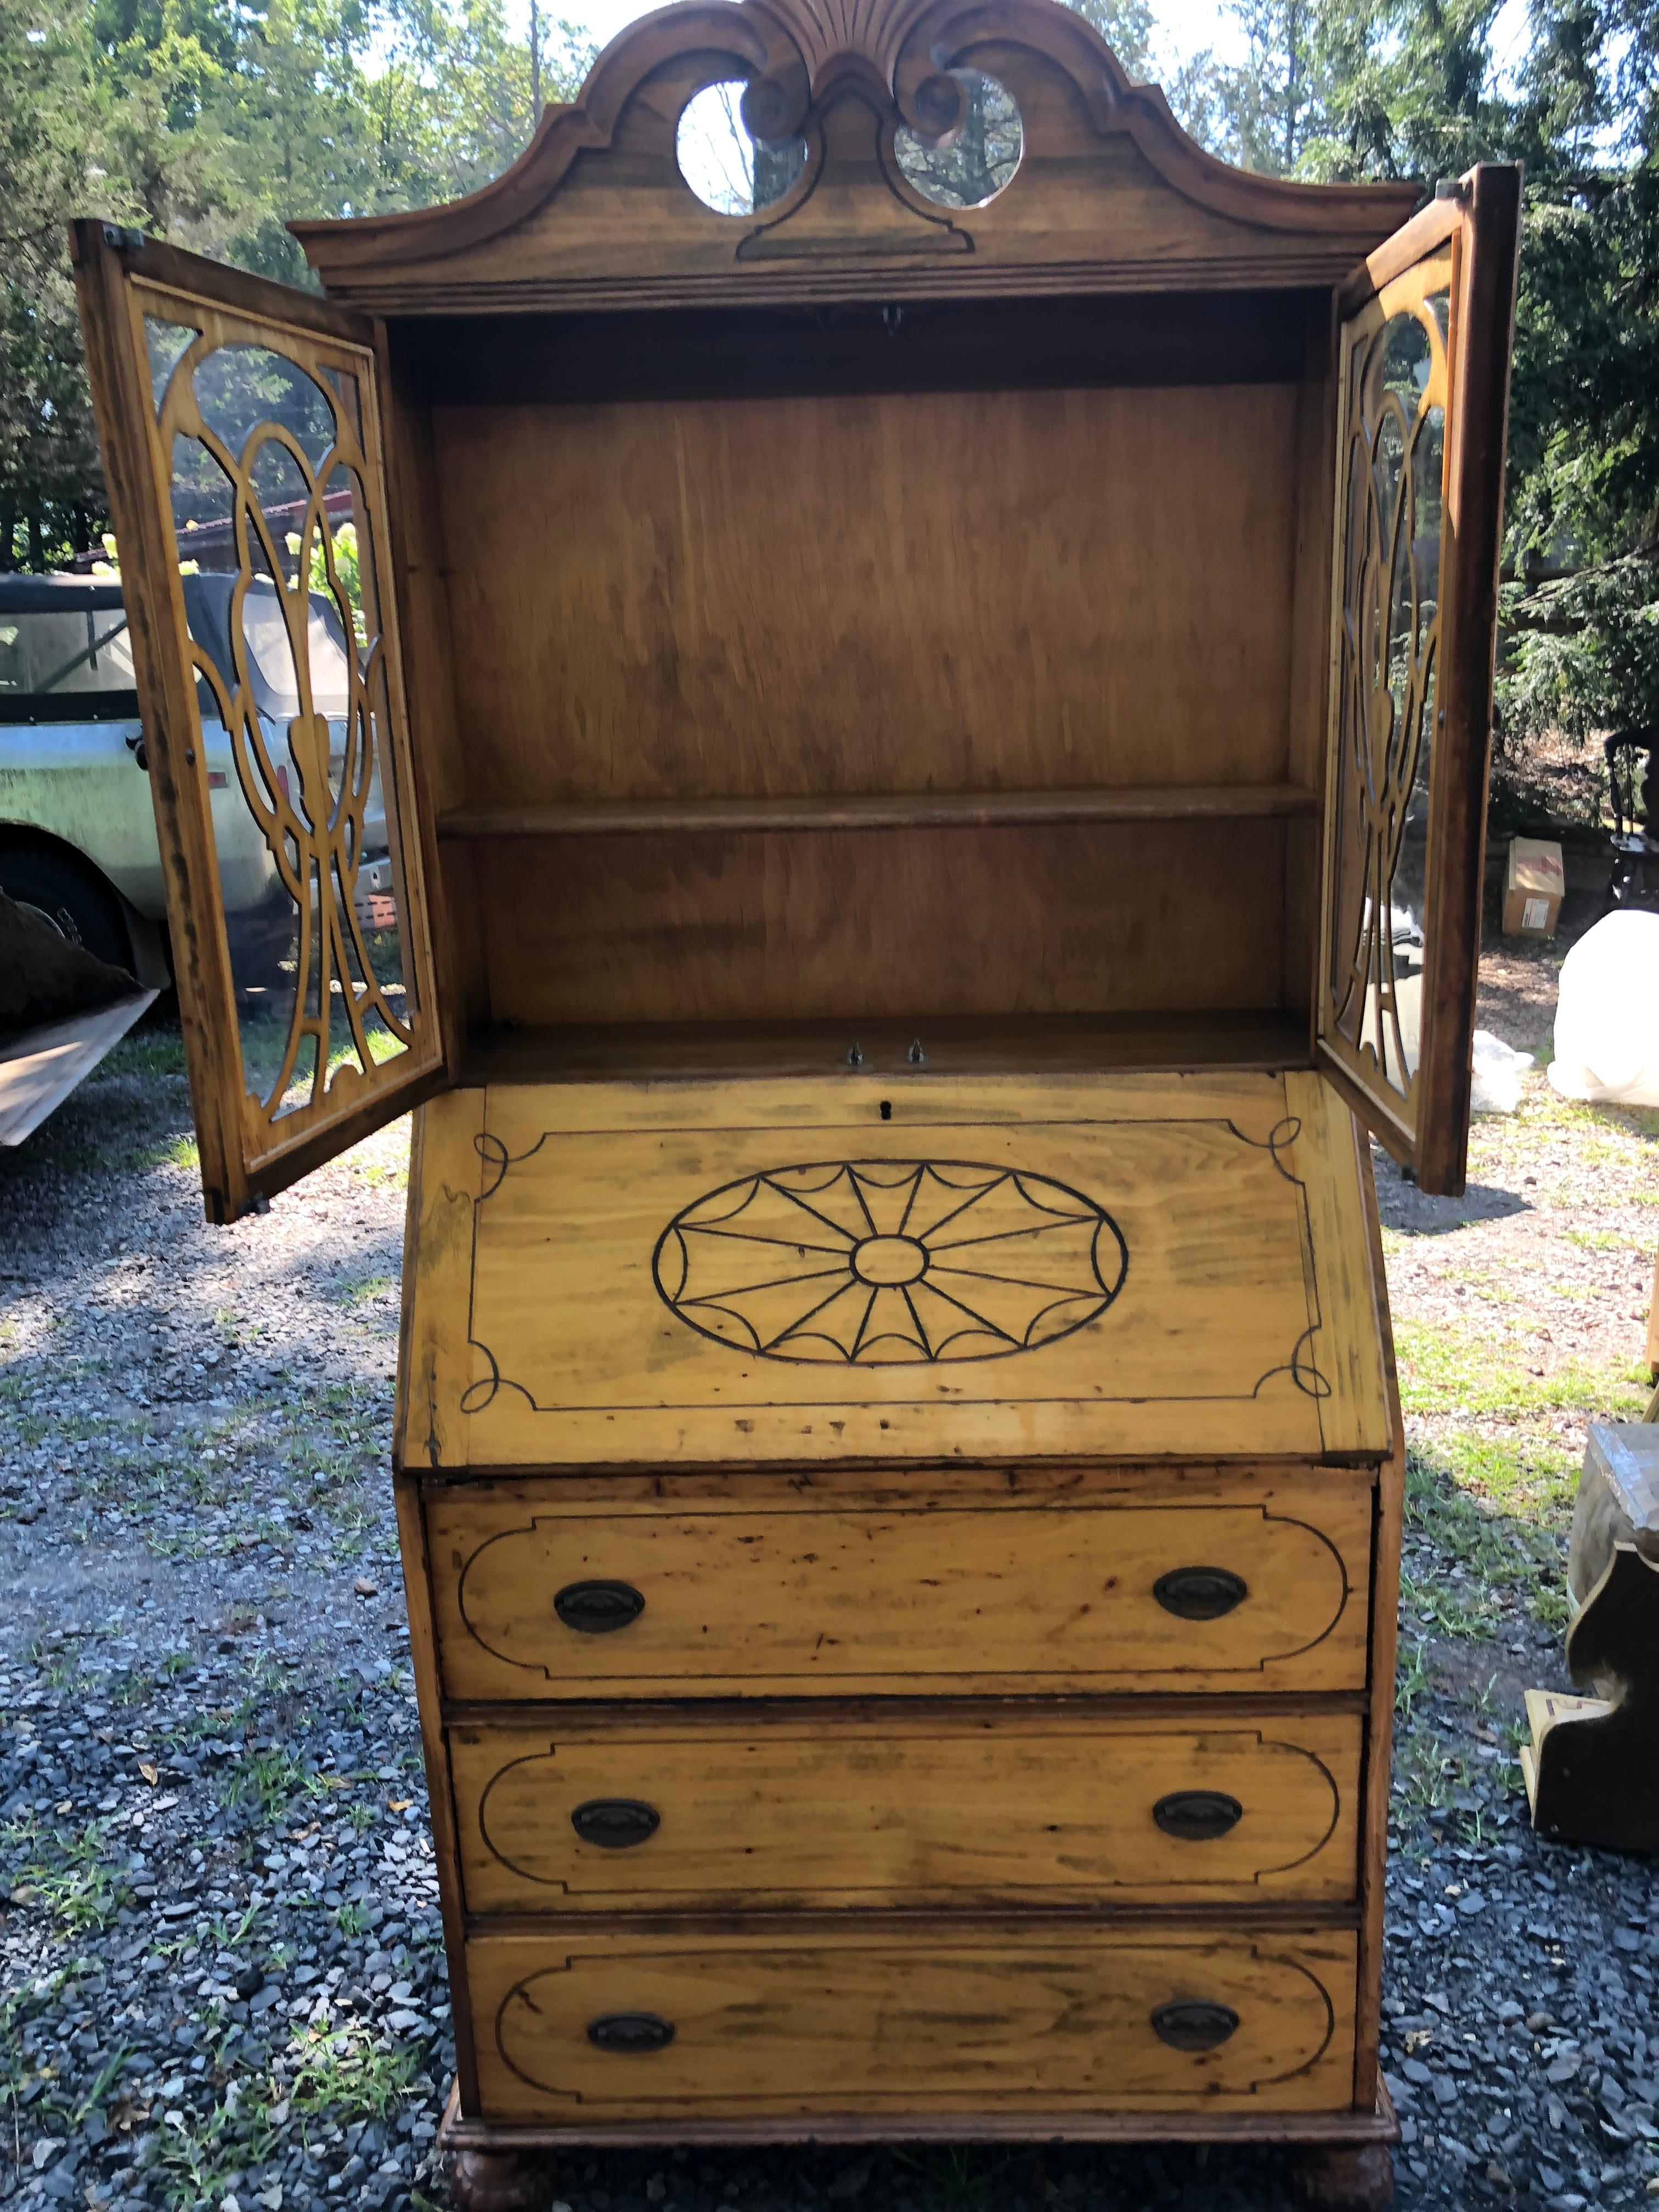 Pretty vintage American secretary cabinet having slant front desk that opens to a 29.5 d surface and cubbies with one little drawer.  The top has glass doors with shelves inside and a lovely decorative shell motif cornice.  On the bottom are 3 roomy